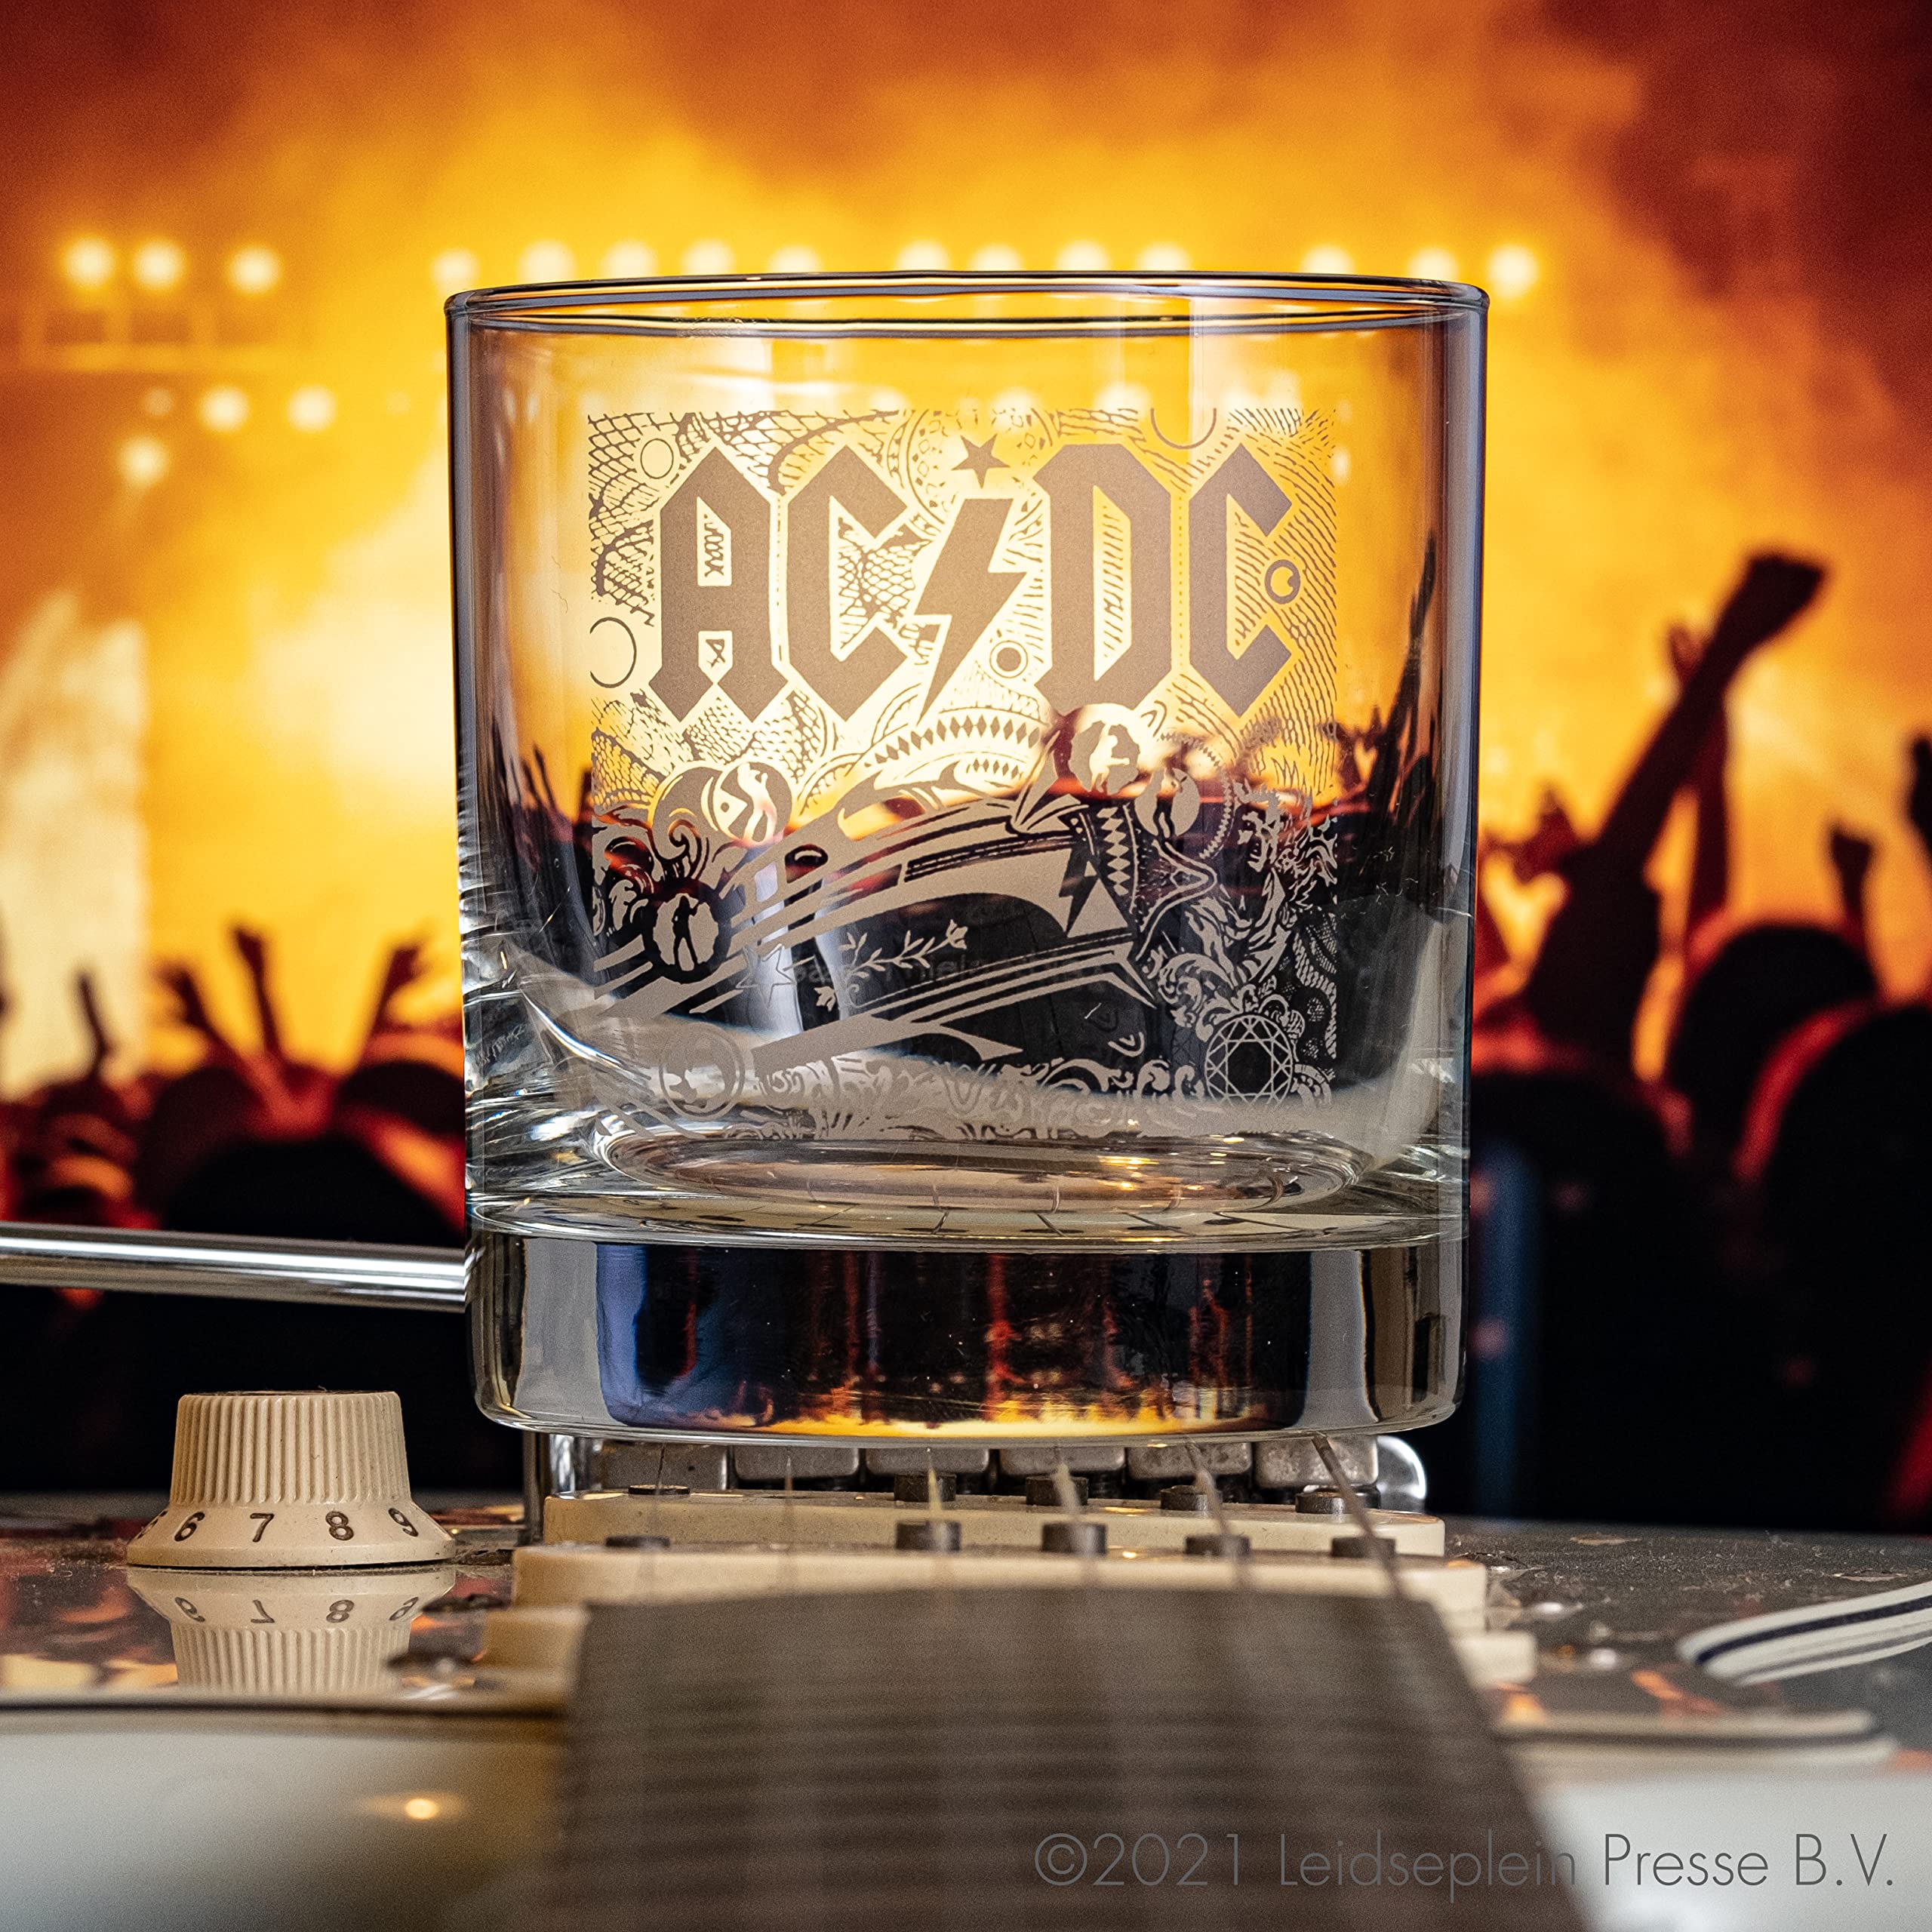 AC/DC Rock n' Roll Train Etched Whiskey Glass - Officially Licensed, Premium Quality, Handcrafted Glassware, 11oz. Rocks Glass - Perfect Collectible Gift for Rock Music Fans, Birthdays, & AC/DC Lovers